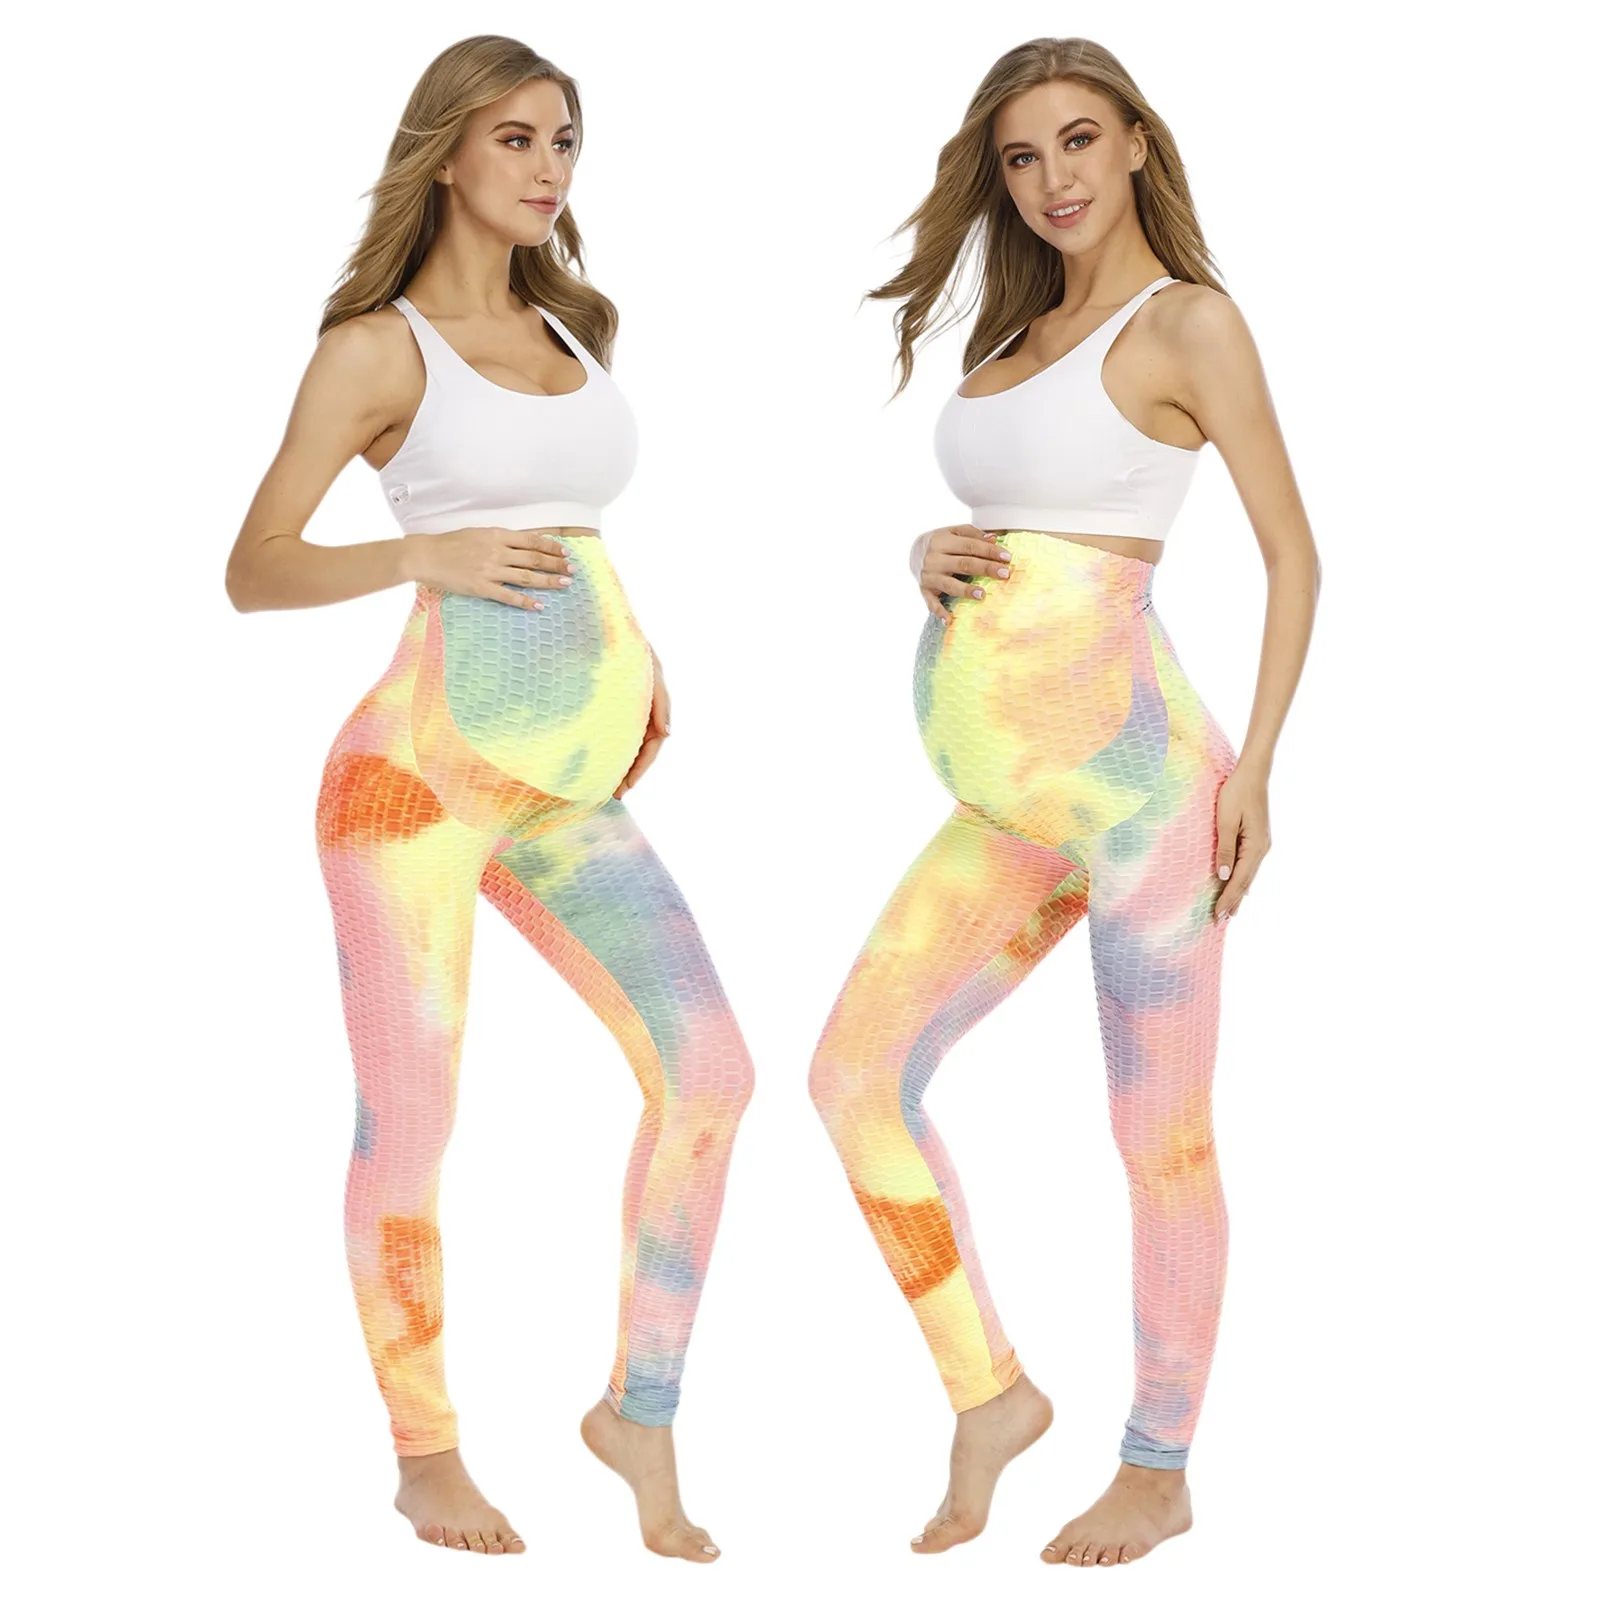 

Pregnant Women Maternity Pregnancy Soft Casual Pants Tie-dyed Stretch Athletic Workout Yoga Full Length Pant Leggings Clothes #8